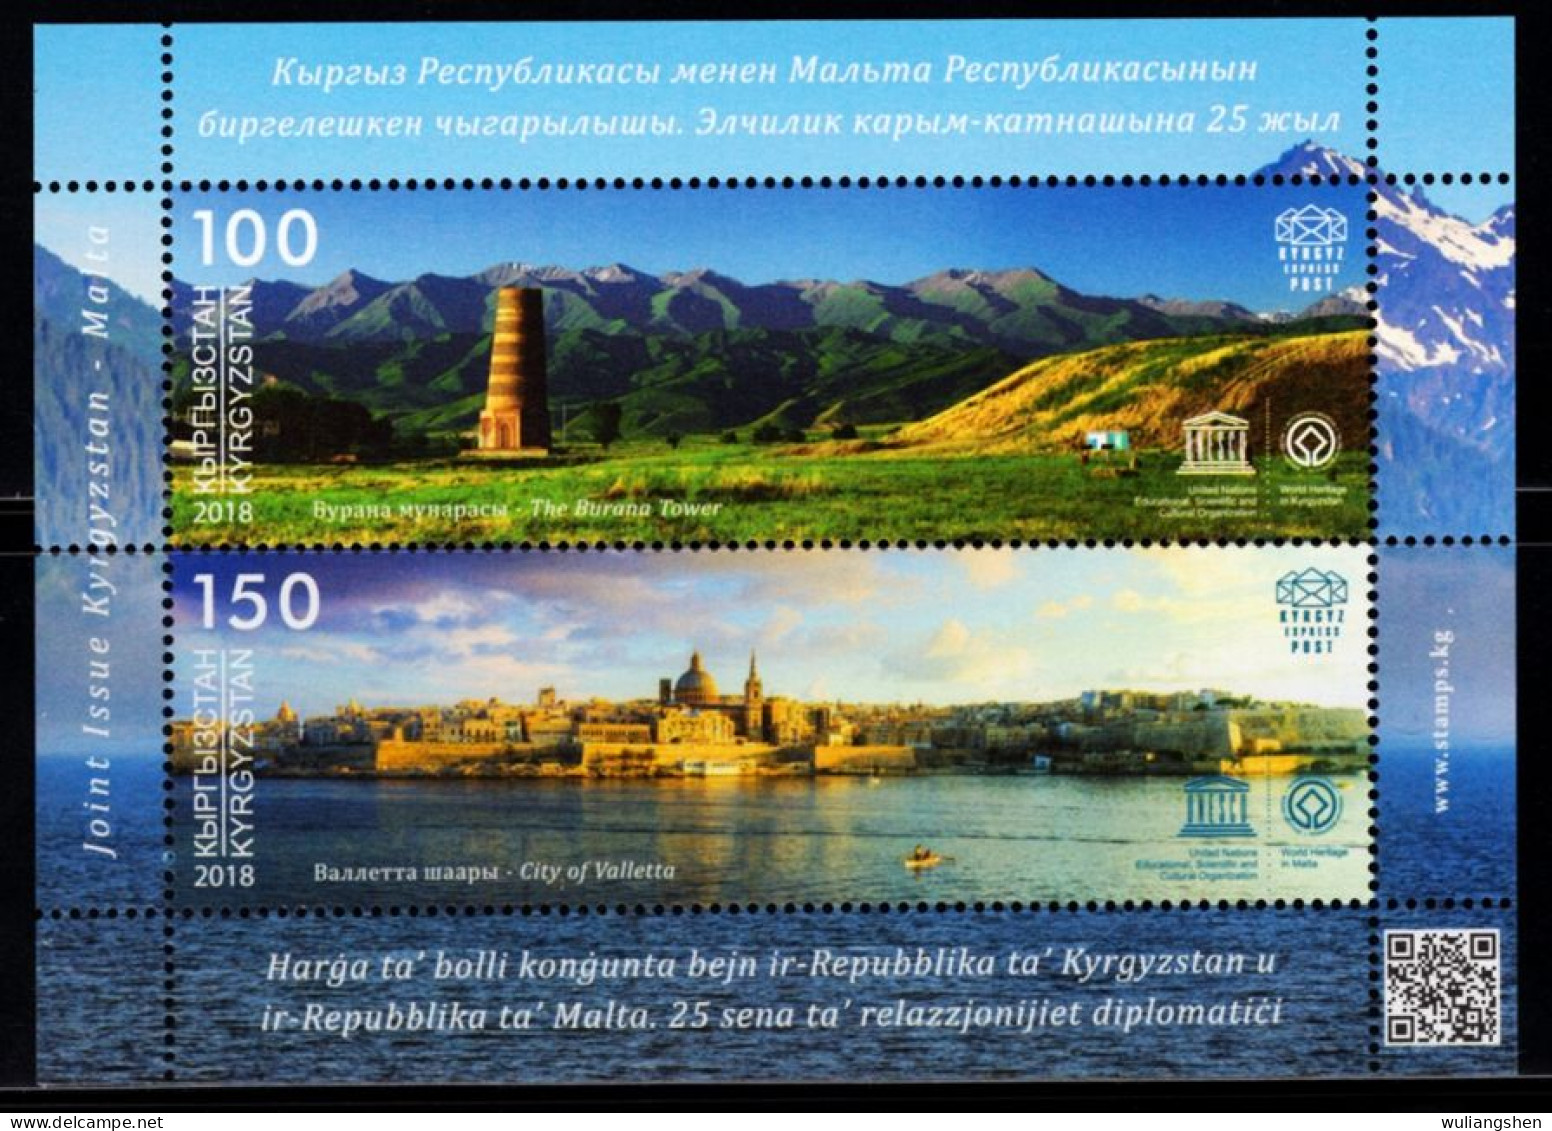 XK0256 List Of Architectural Heritage In Kyrgyzstan And Malta In 2018 MNH - Kirghizistan